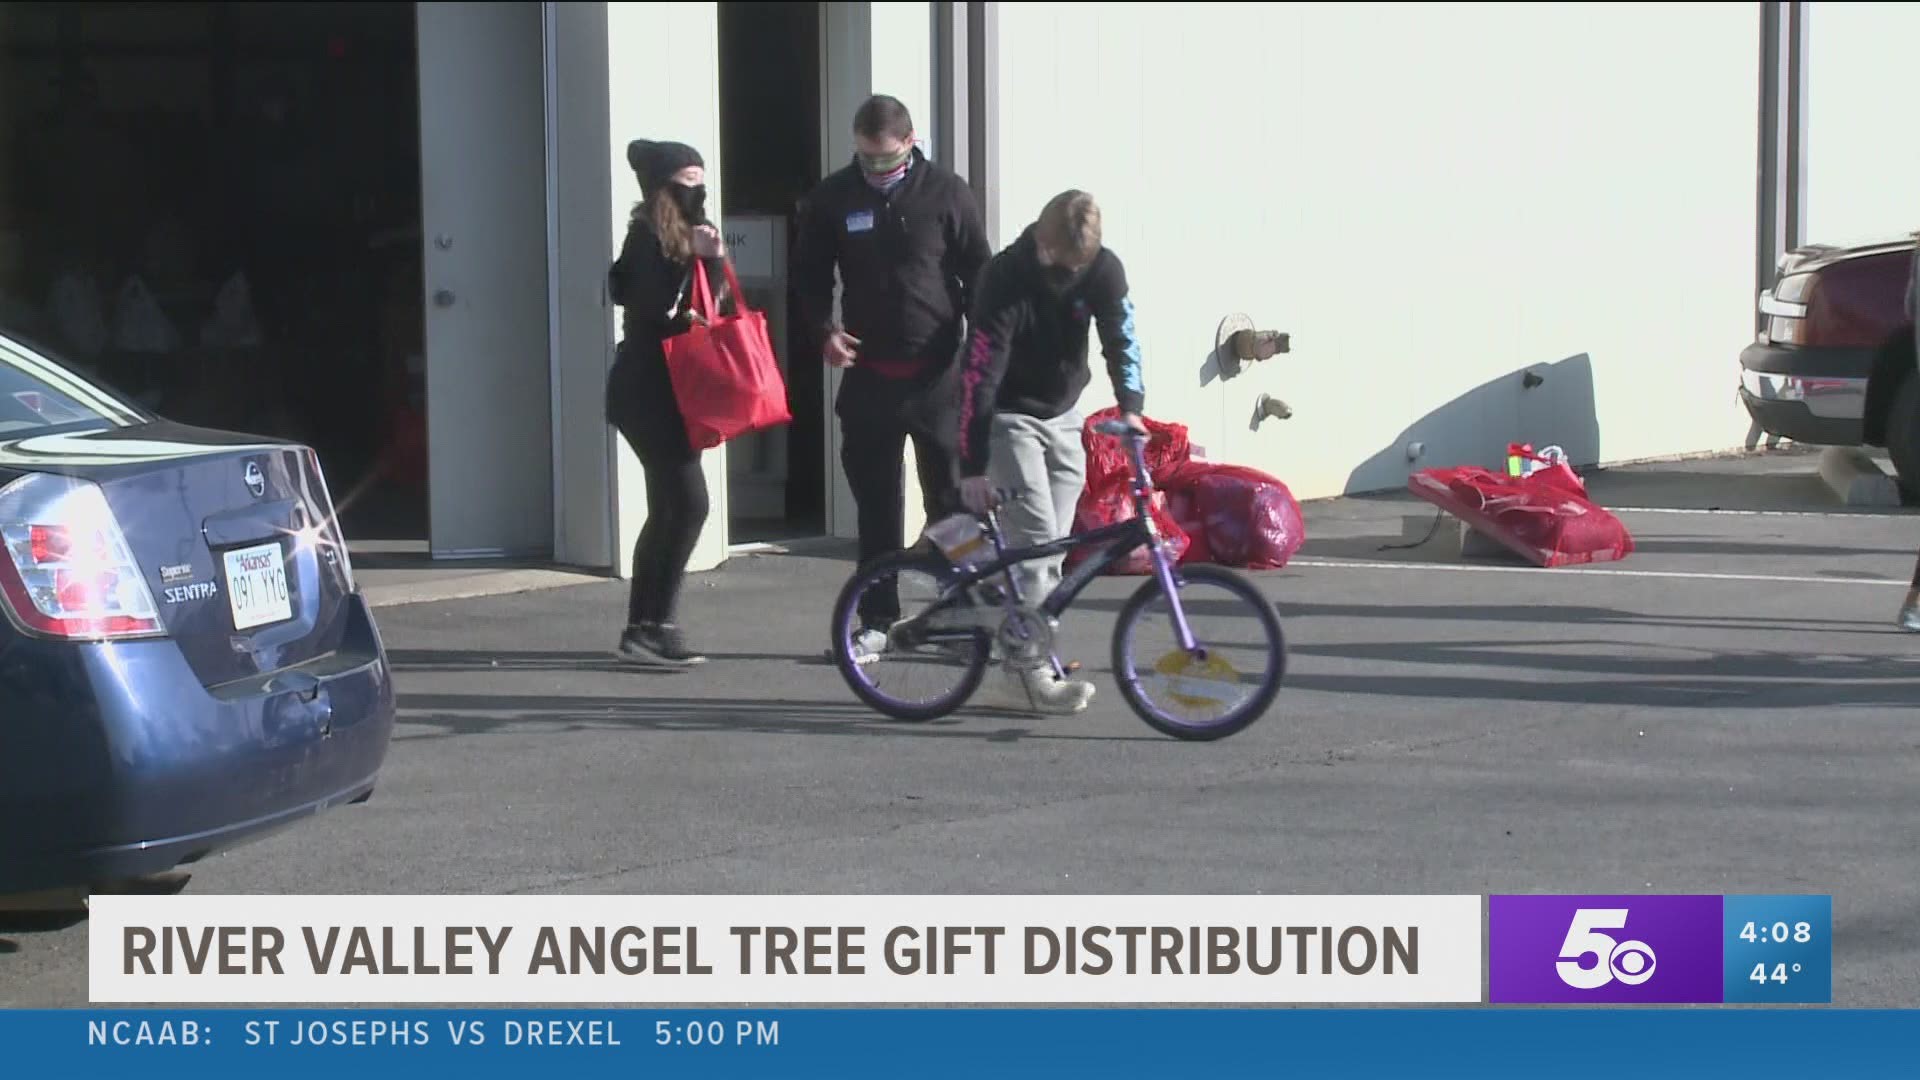 On Thursday the Salvation Army in Fort Smith spread holiday cheer by spending the day distributing angel tree gifts.